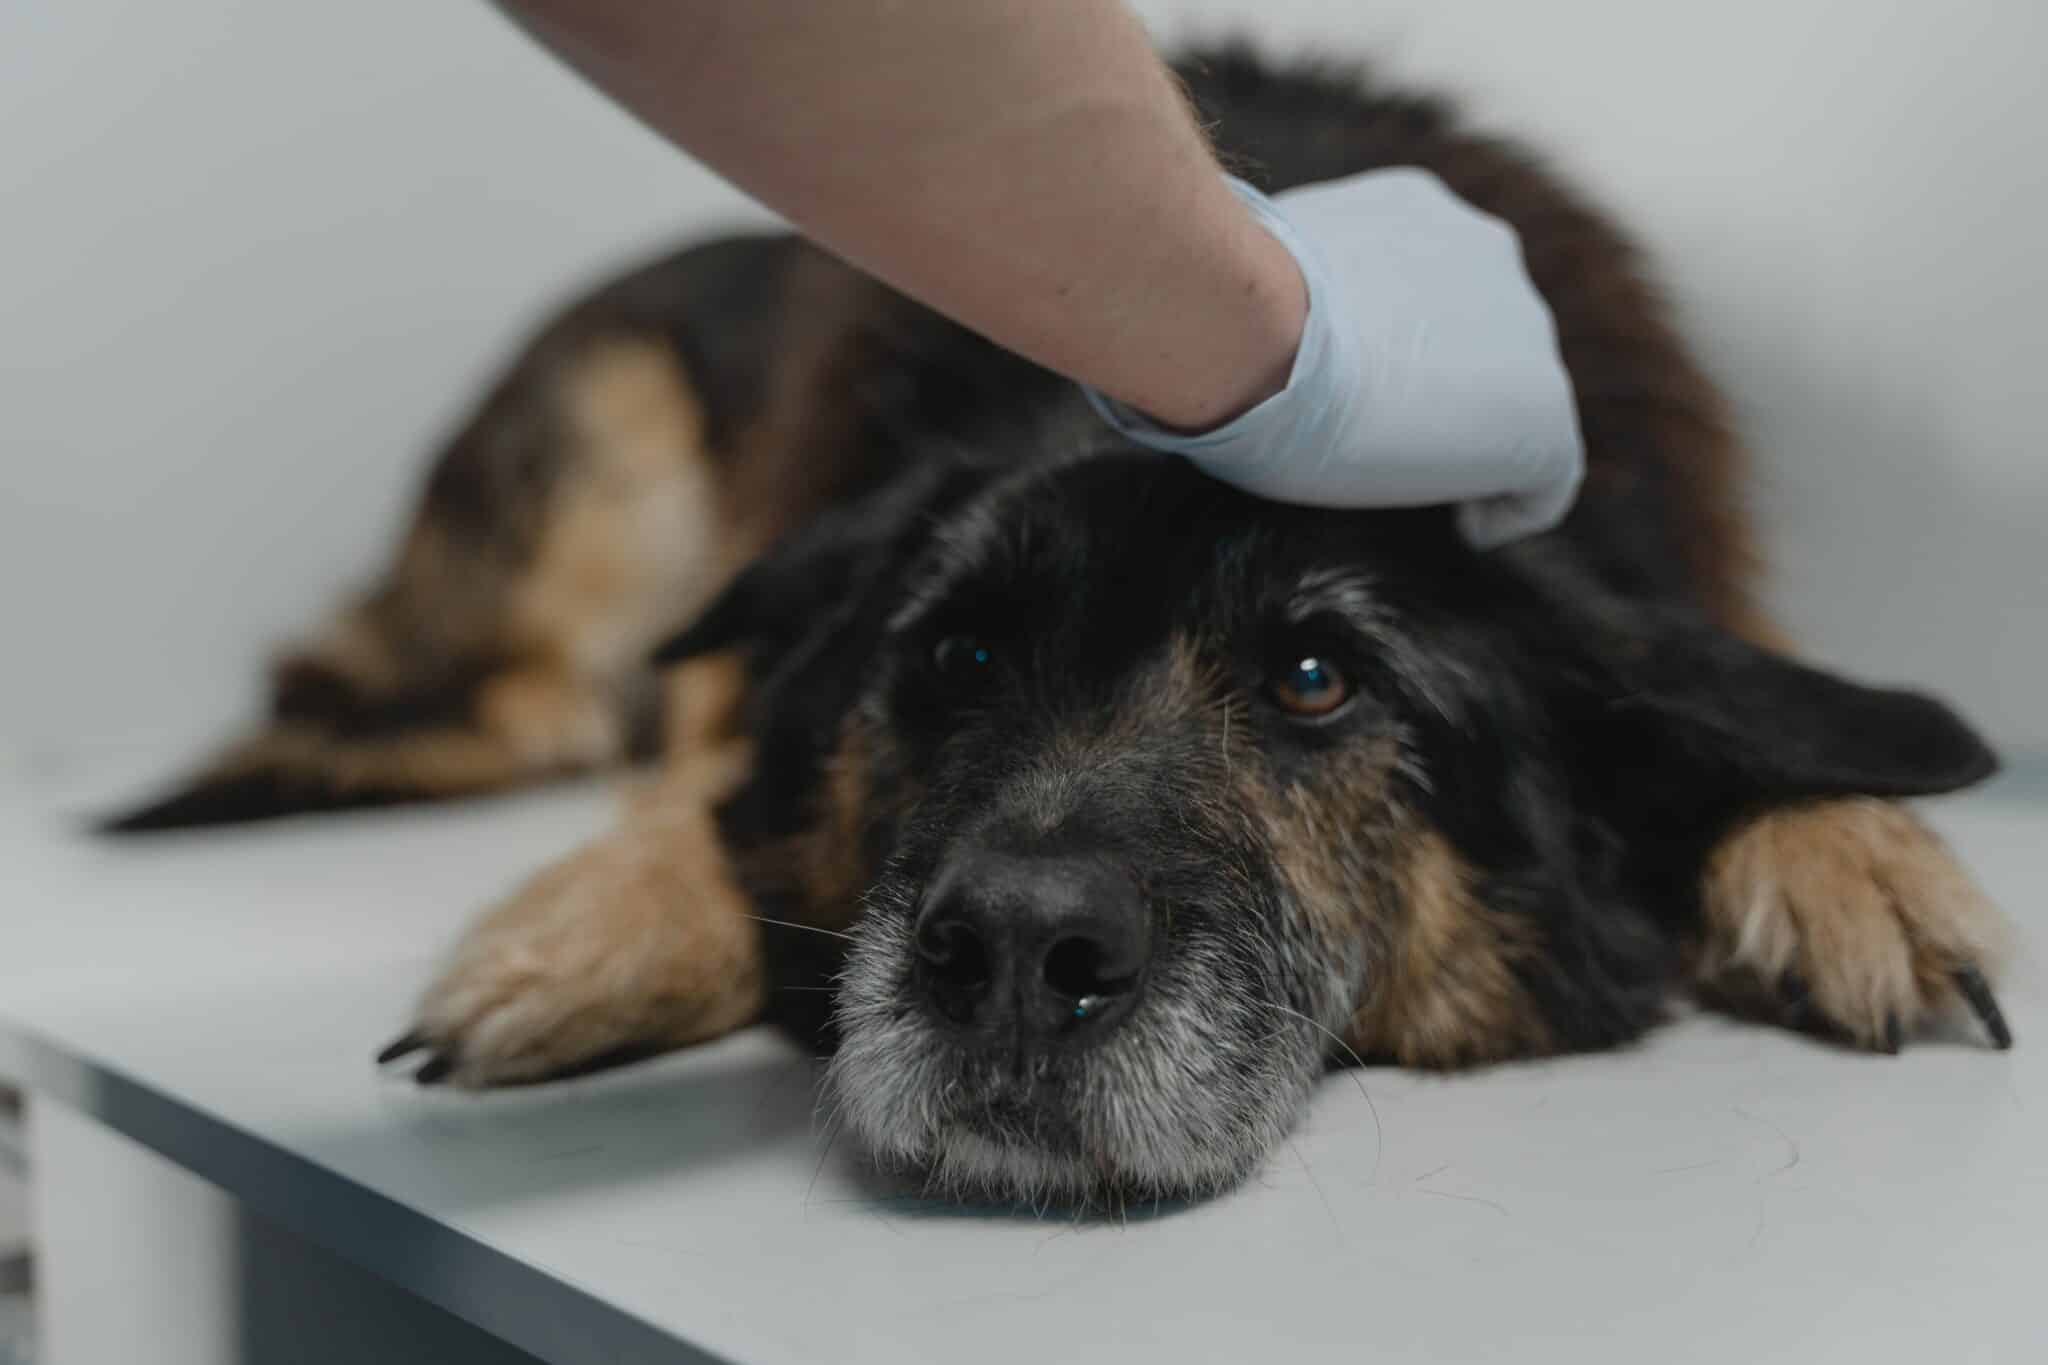 An old dog being examined by a vet